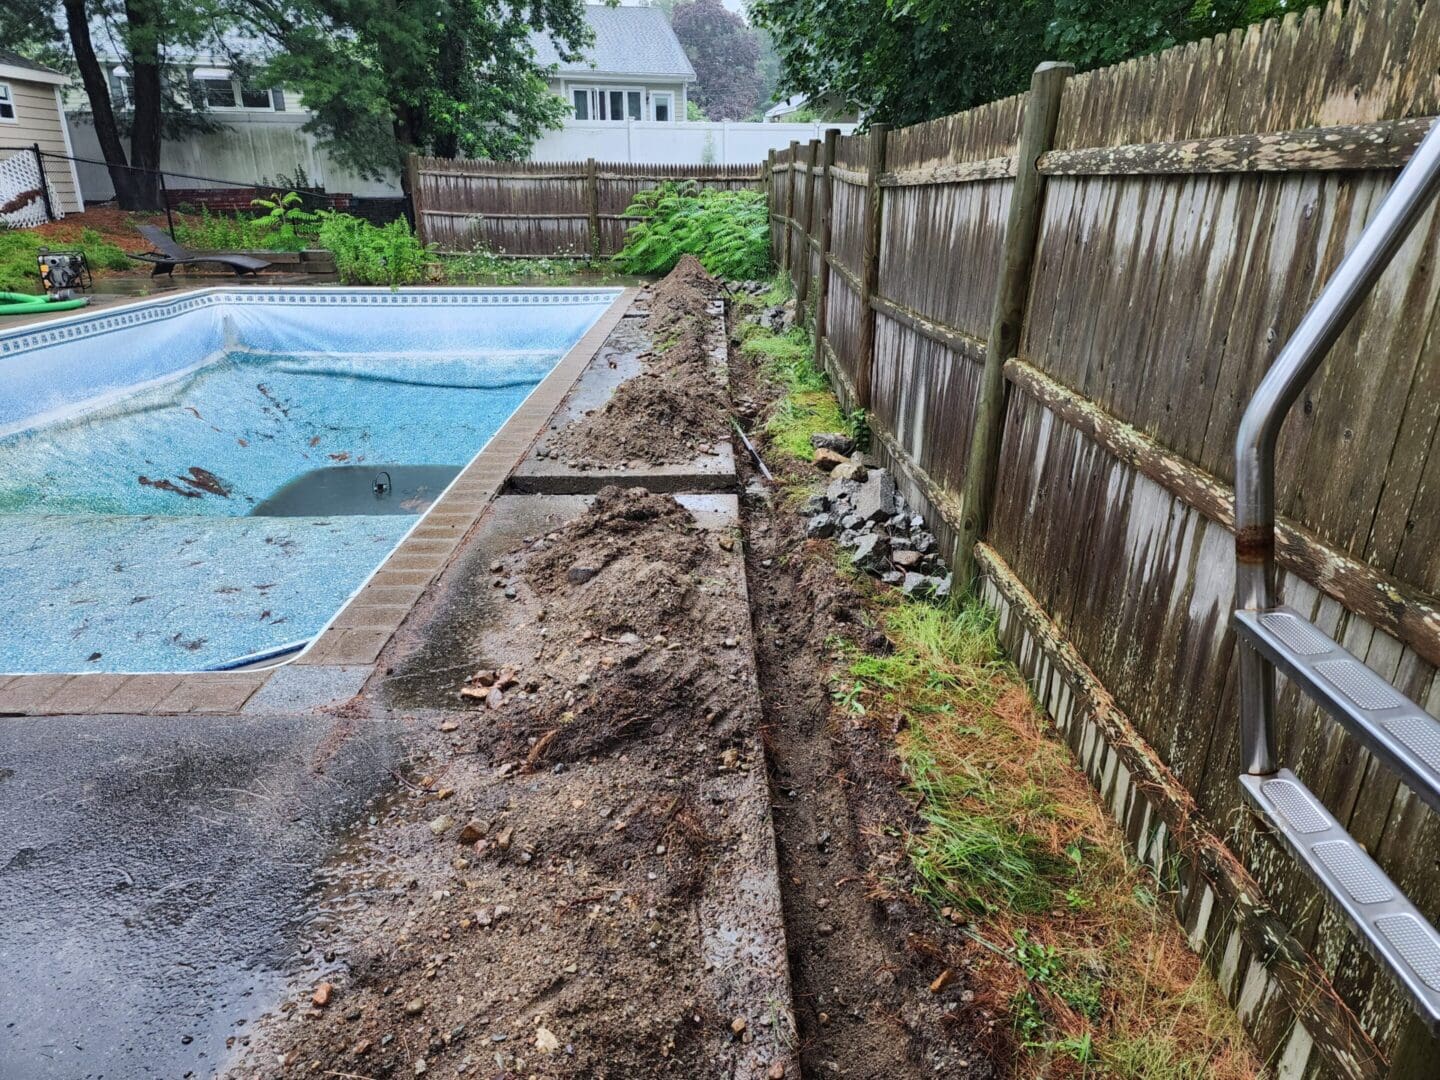 A pool is being dug out of the ground.